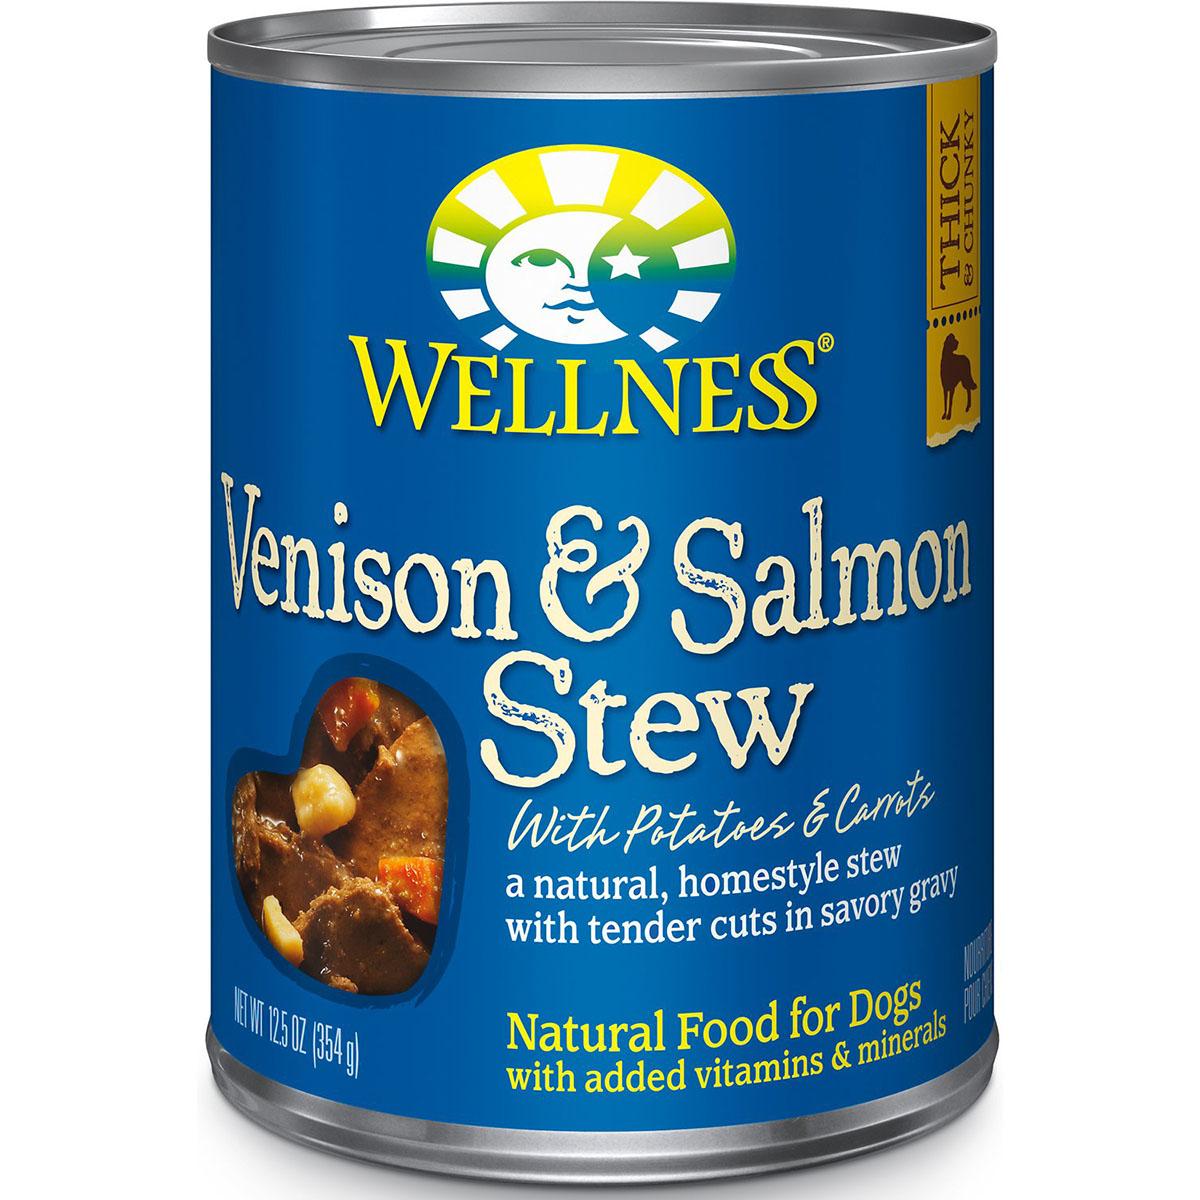 wellness-venison-salmon-stew-with-potatoes-carrots-canned-dog-food-